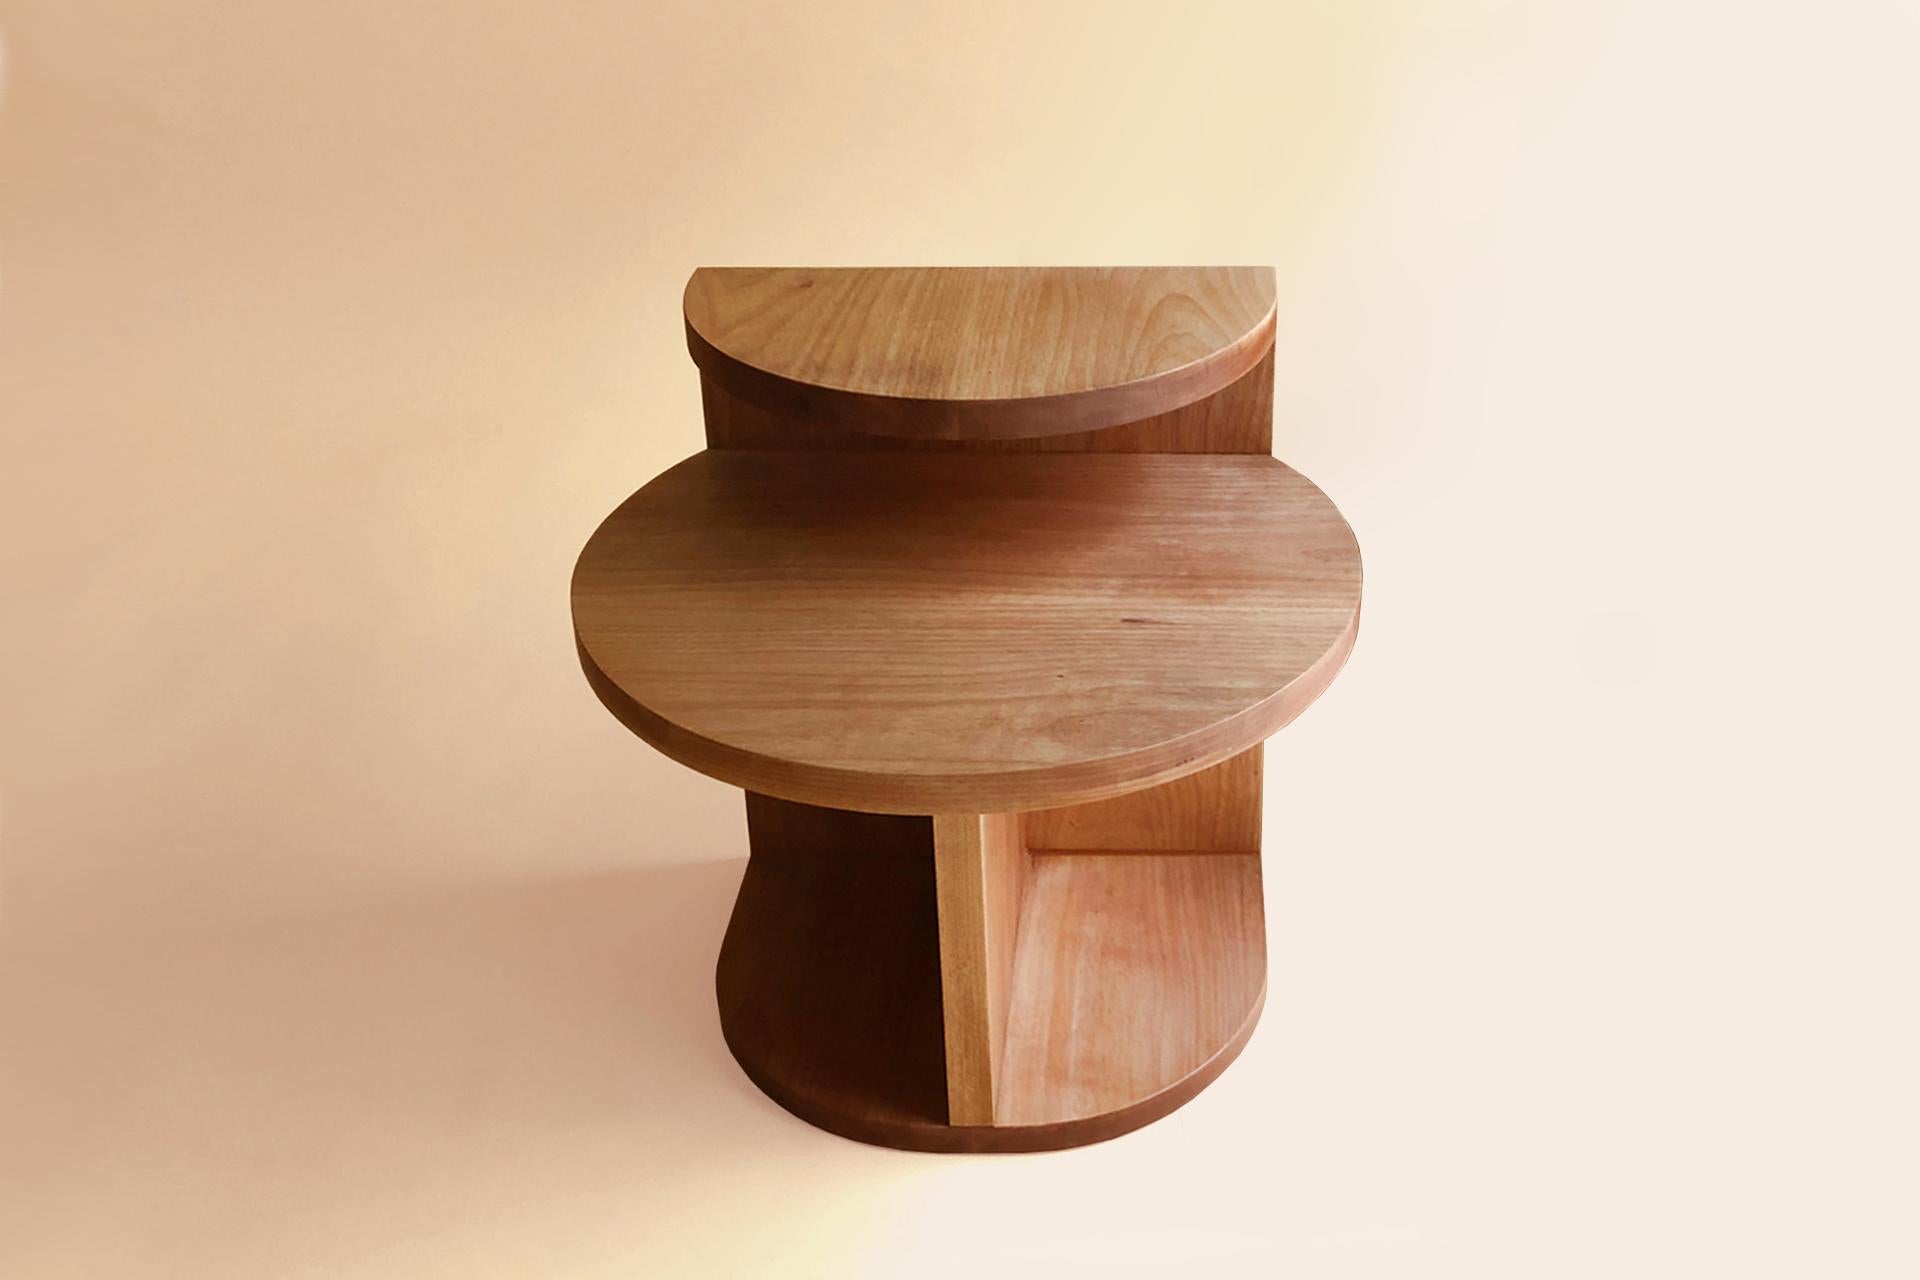 The café side table has simple geometric shapes. Its contemporary design includes with two circular shaped tops and two levels of height make the table a versatile piece that can be used as a coffee table or side table; and in composition with 02